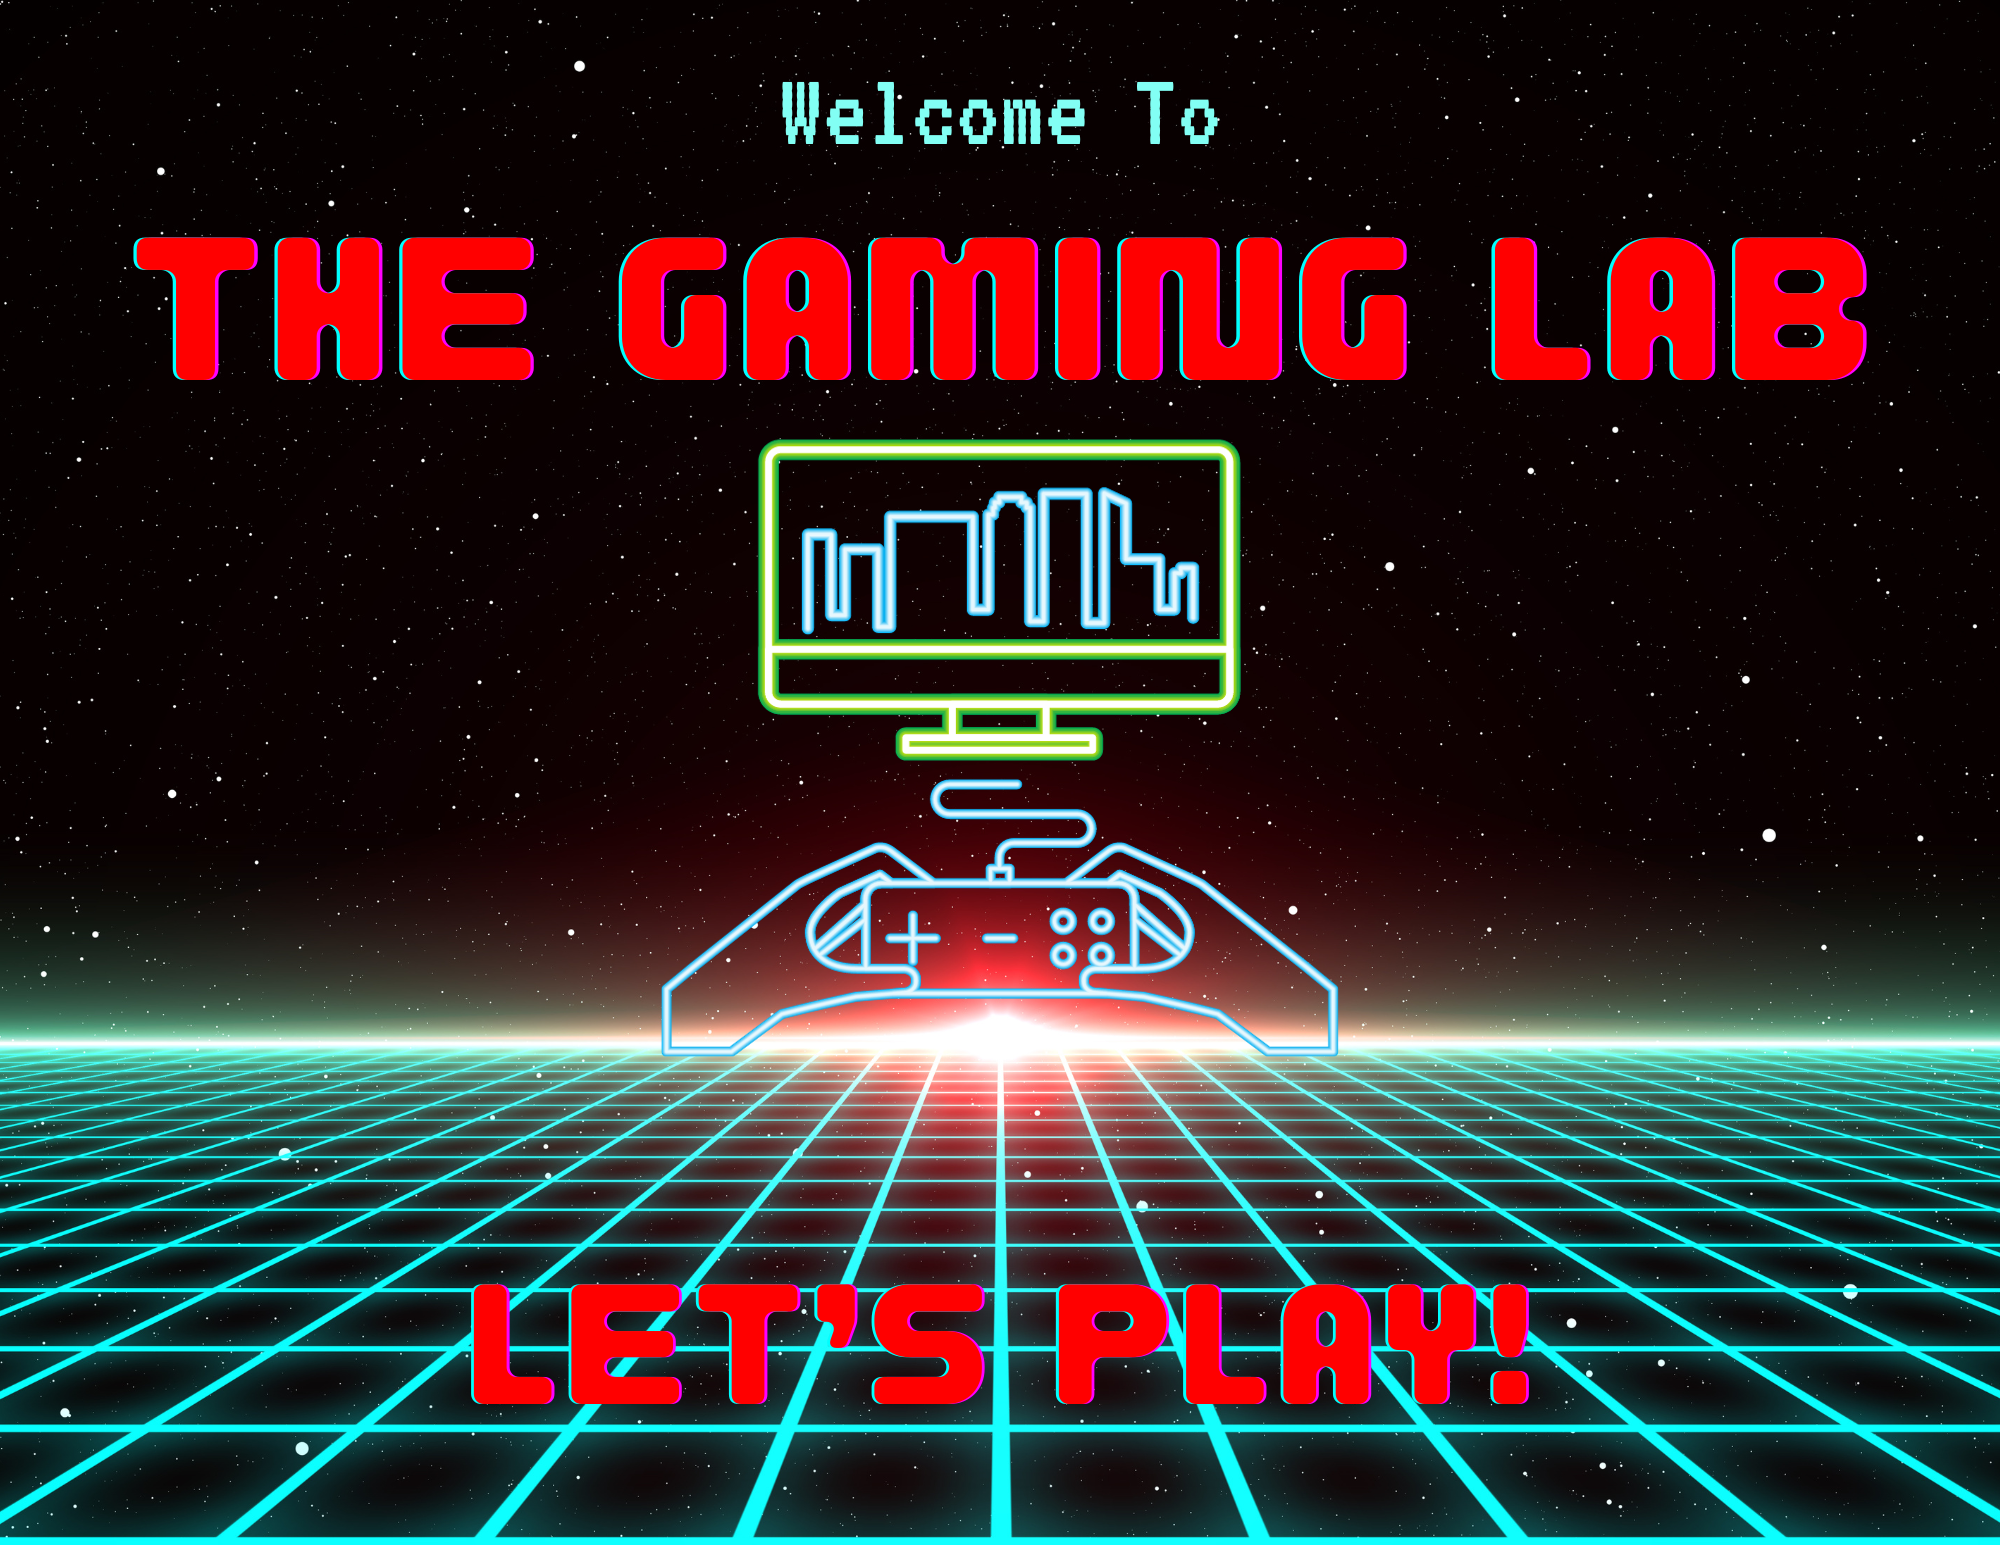 The Gaming Lab